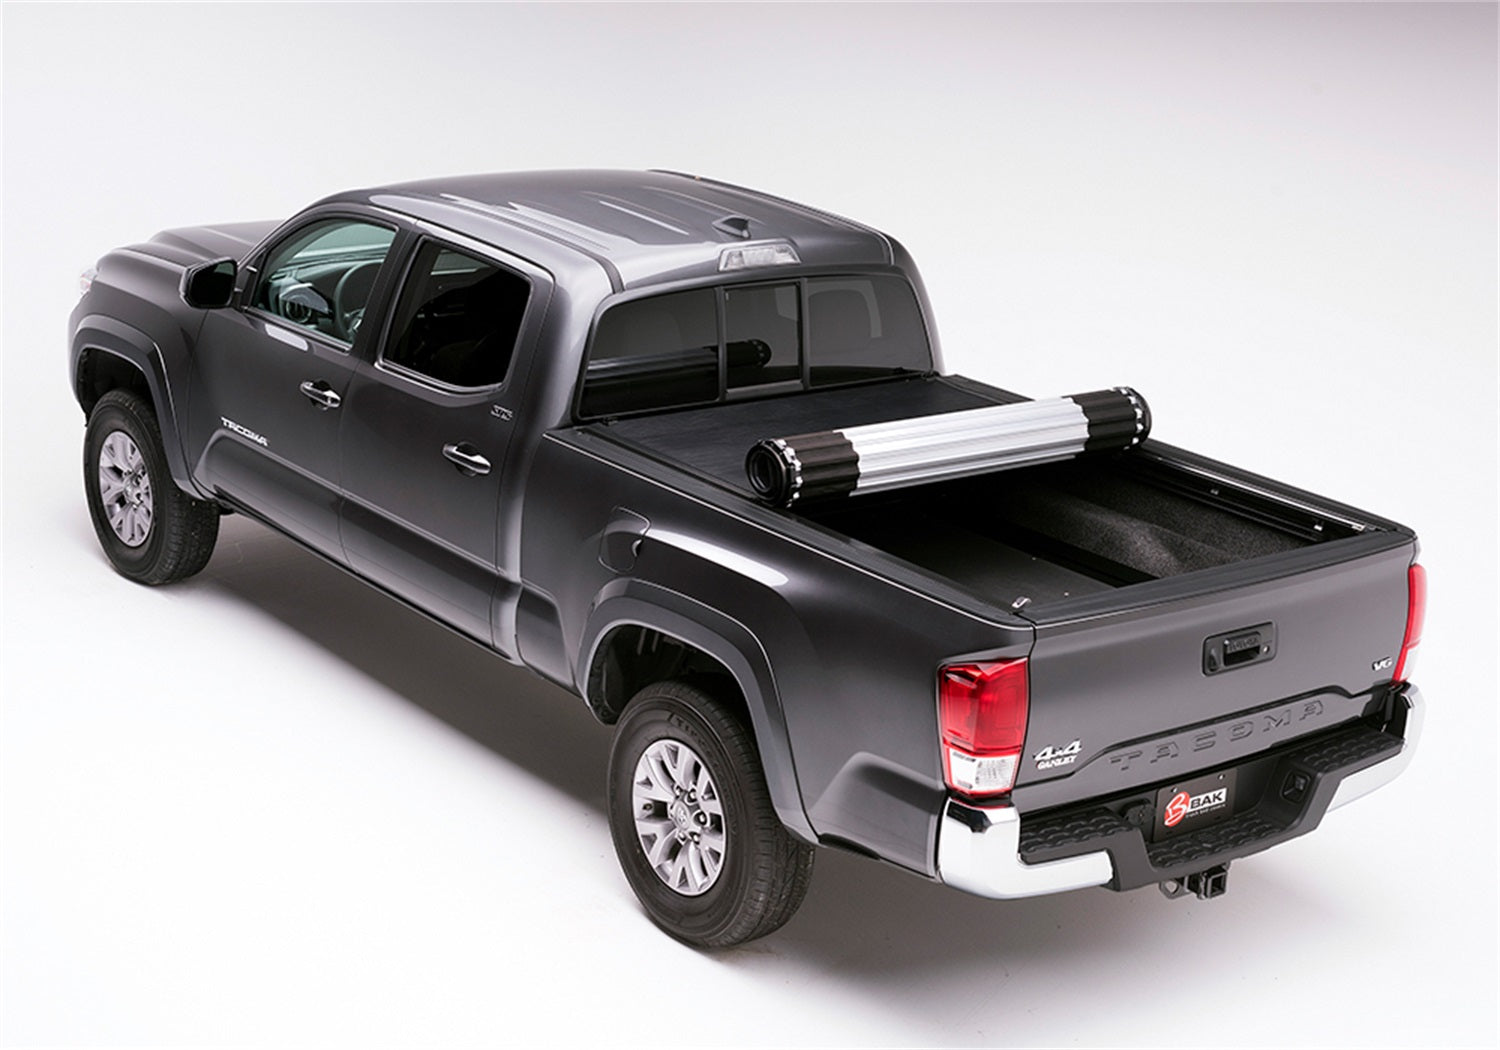 BAK Industries 39406 Revolver X2 Hard Rolling Truck Bed Cover Fits 05-15 Tacoma